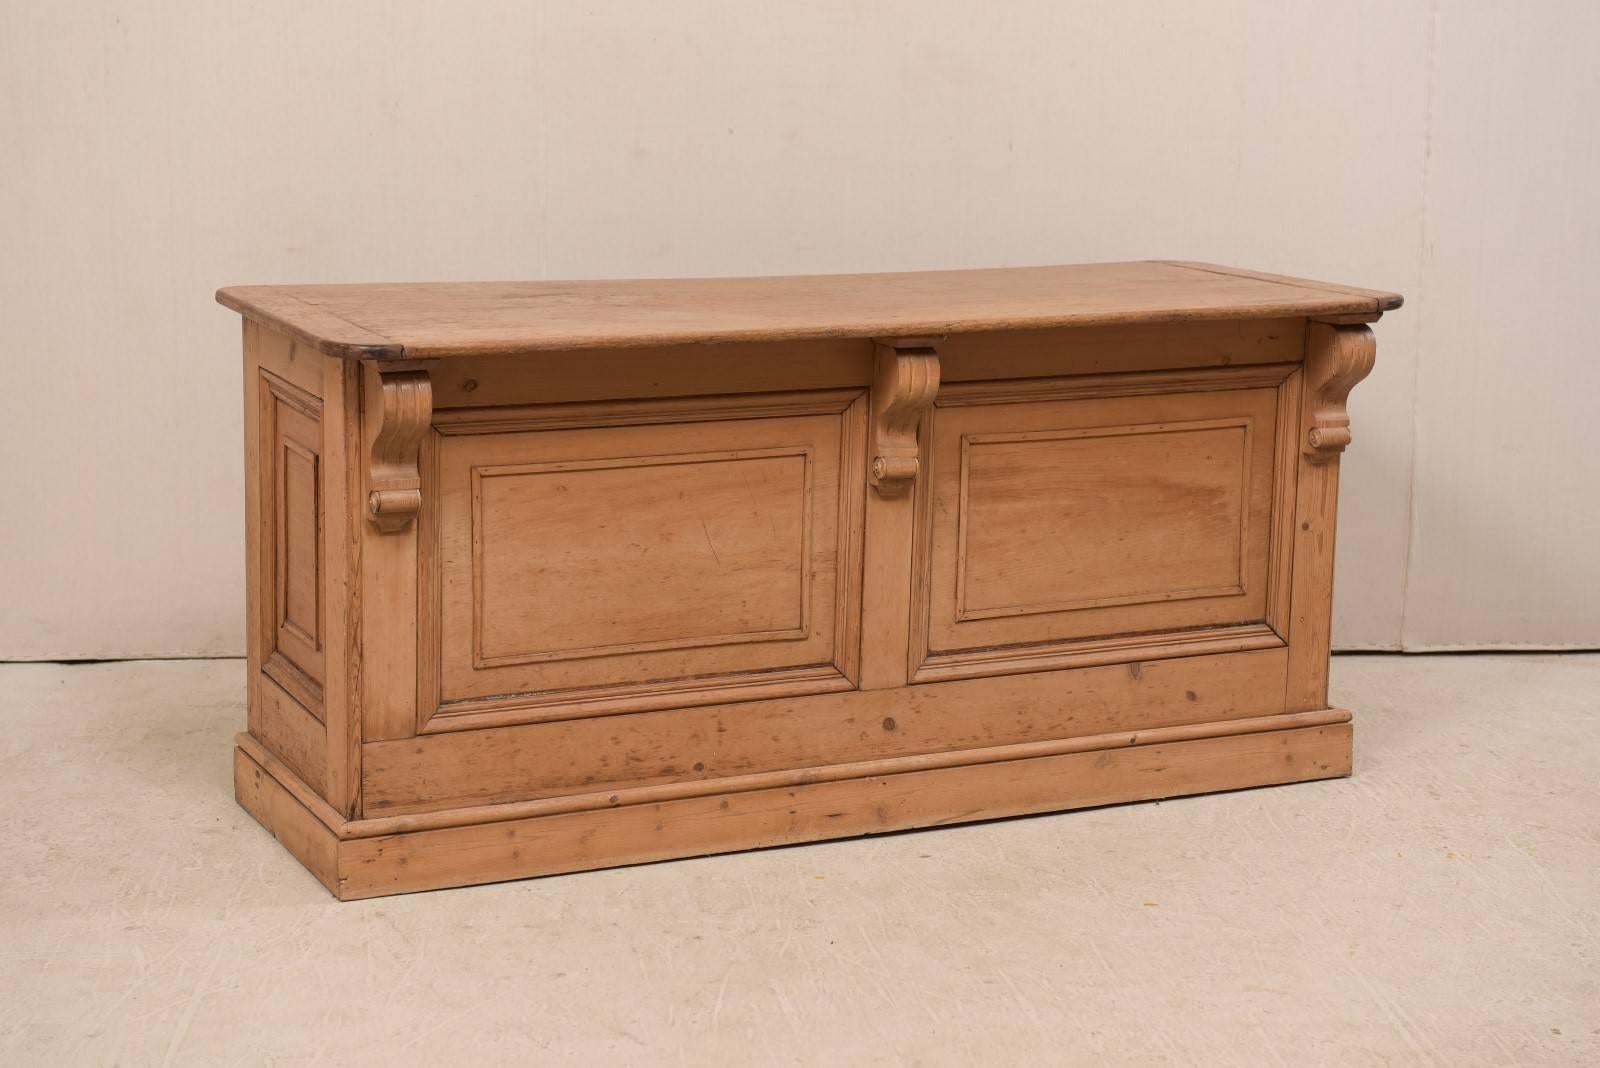 An English kitchen island from the 19th century. This antique natural finished wooden island features a rectangular-shaped overhanging top (at one long side) supported with three large carved volute brackets, with recessed panels decorating the